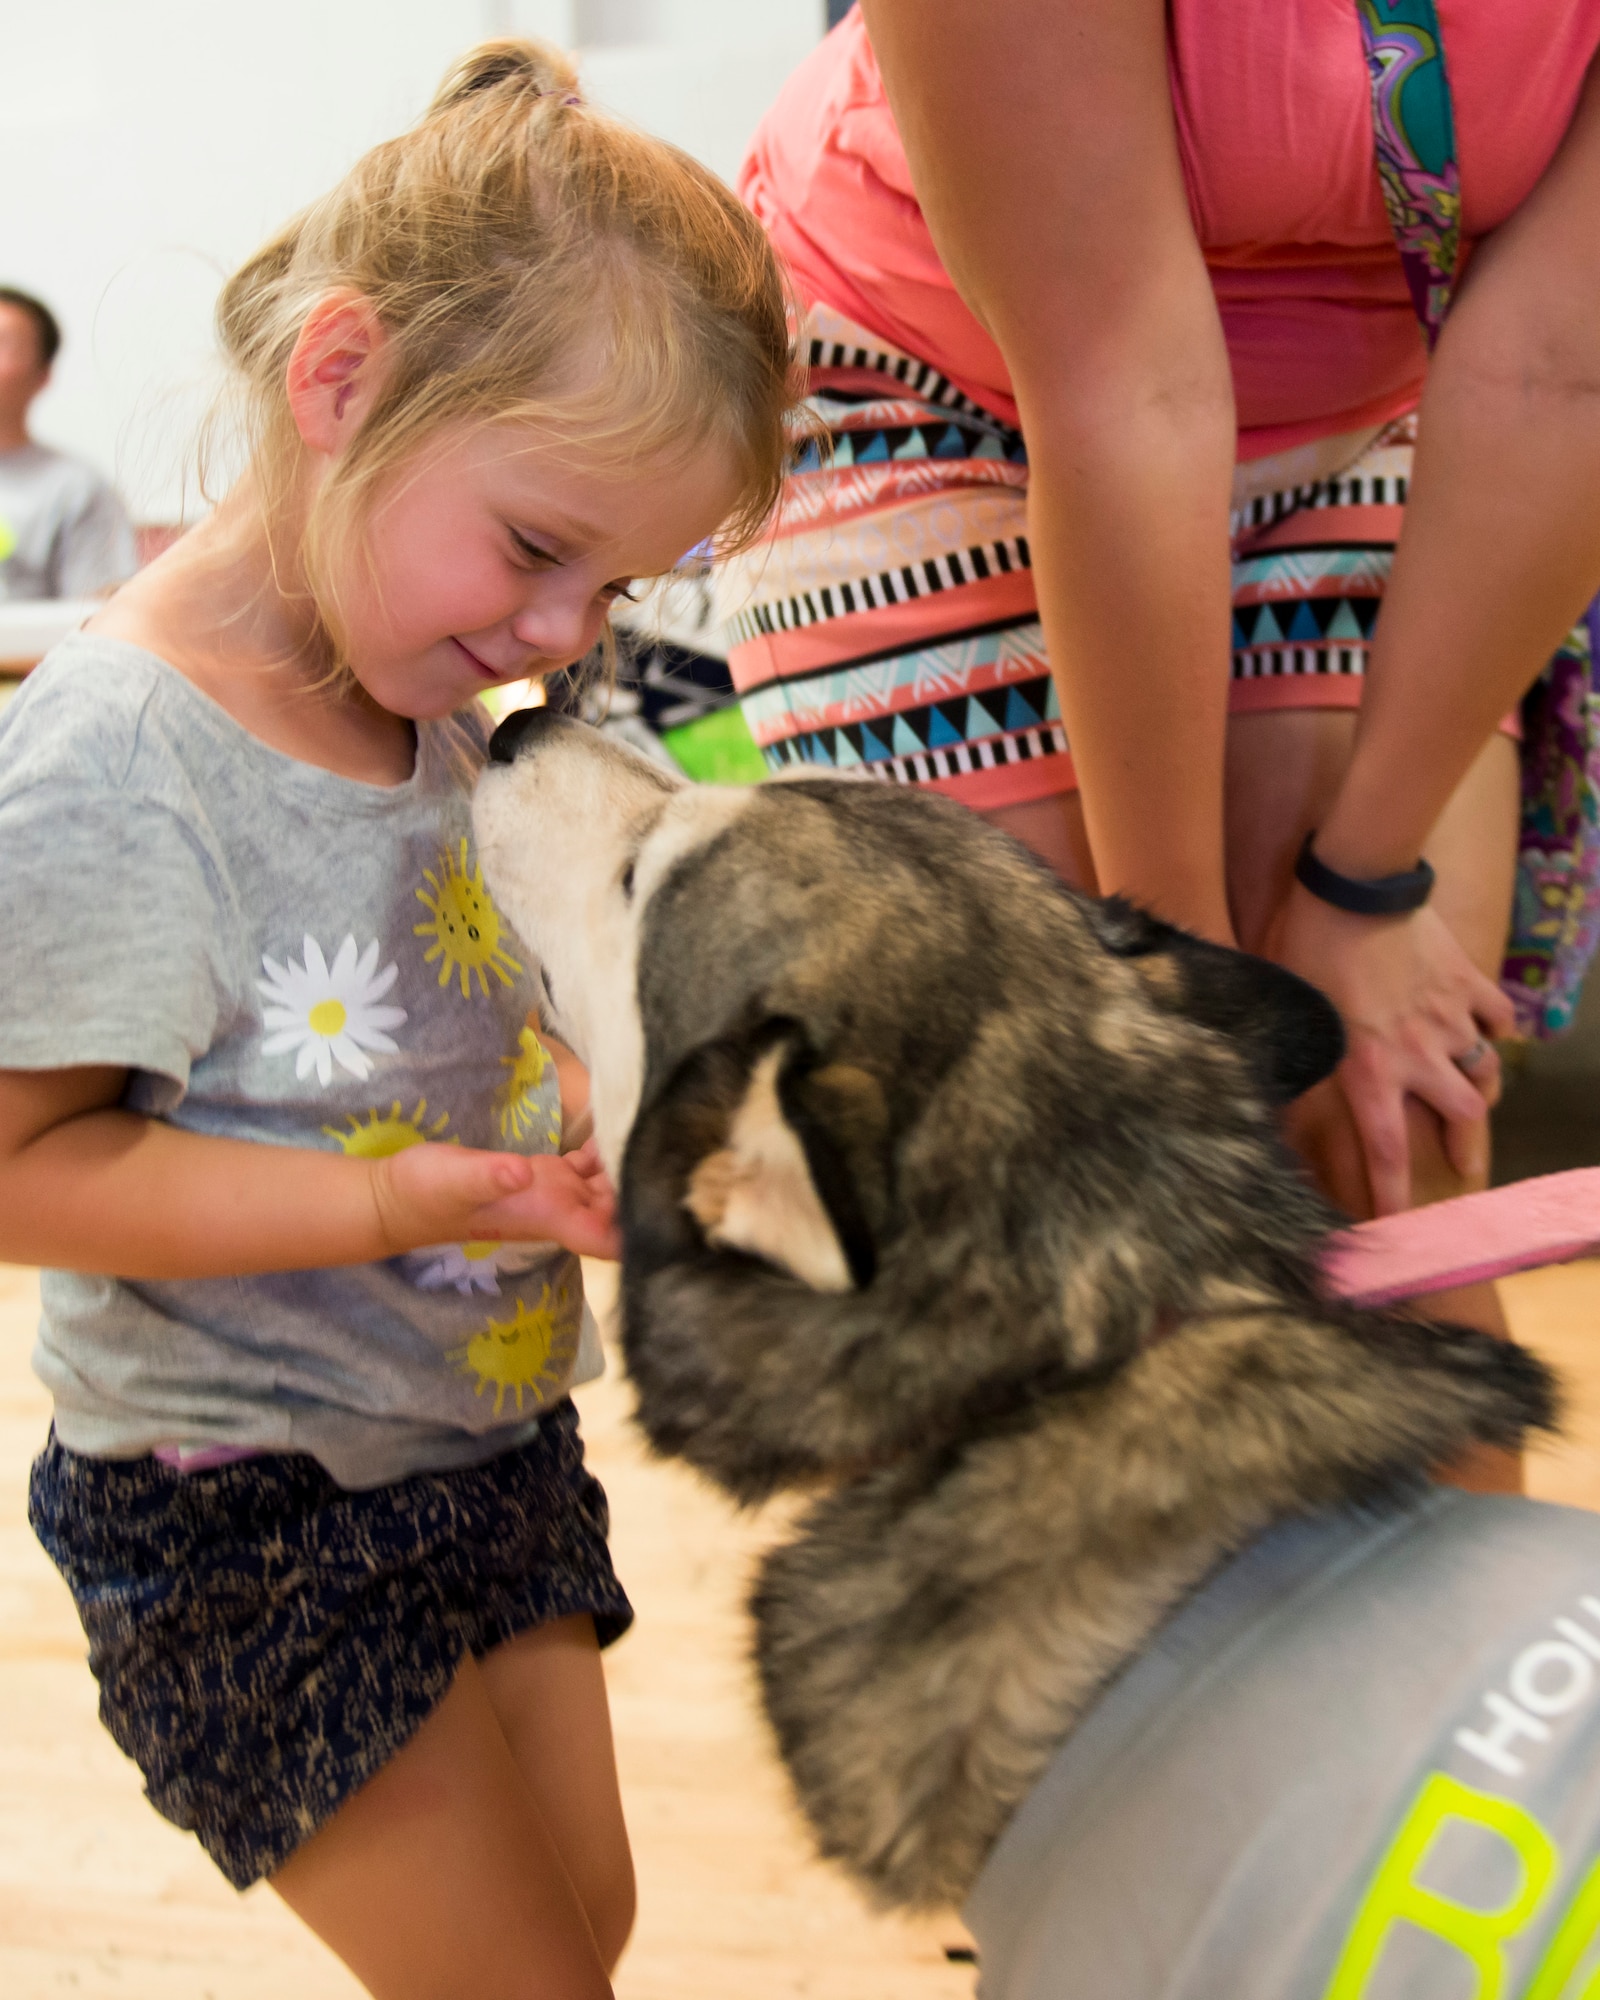 Annelise, 3, plays with a Siberian husky named Mya at the Big Give after-party August 12, 2016 at Holloman Air Force Base, N.M. Over the course of three weeks, 32 teams of 412 participants spent nearly 5,000 man hours volunteering in the local community — saving the area $202,092.33. (Last names are being withheld due to operational requirements. U.S. Air Force photo by Airman 1st Class Randahl J. Jenson)